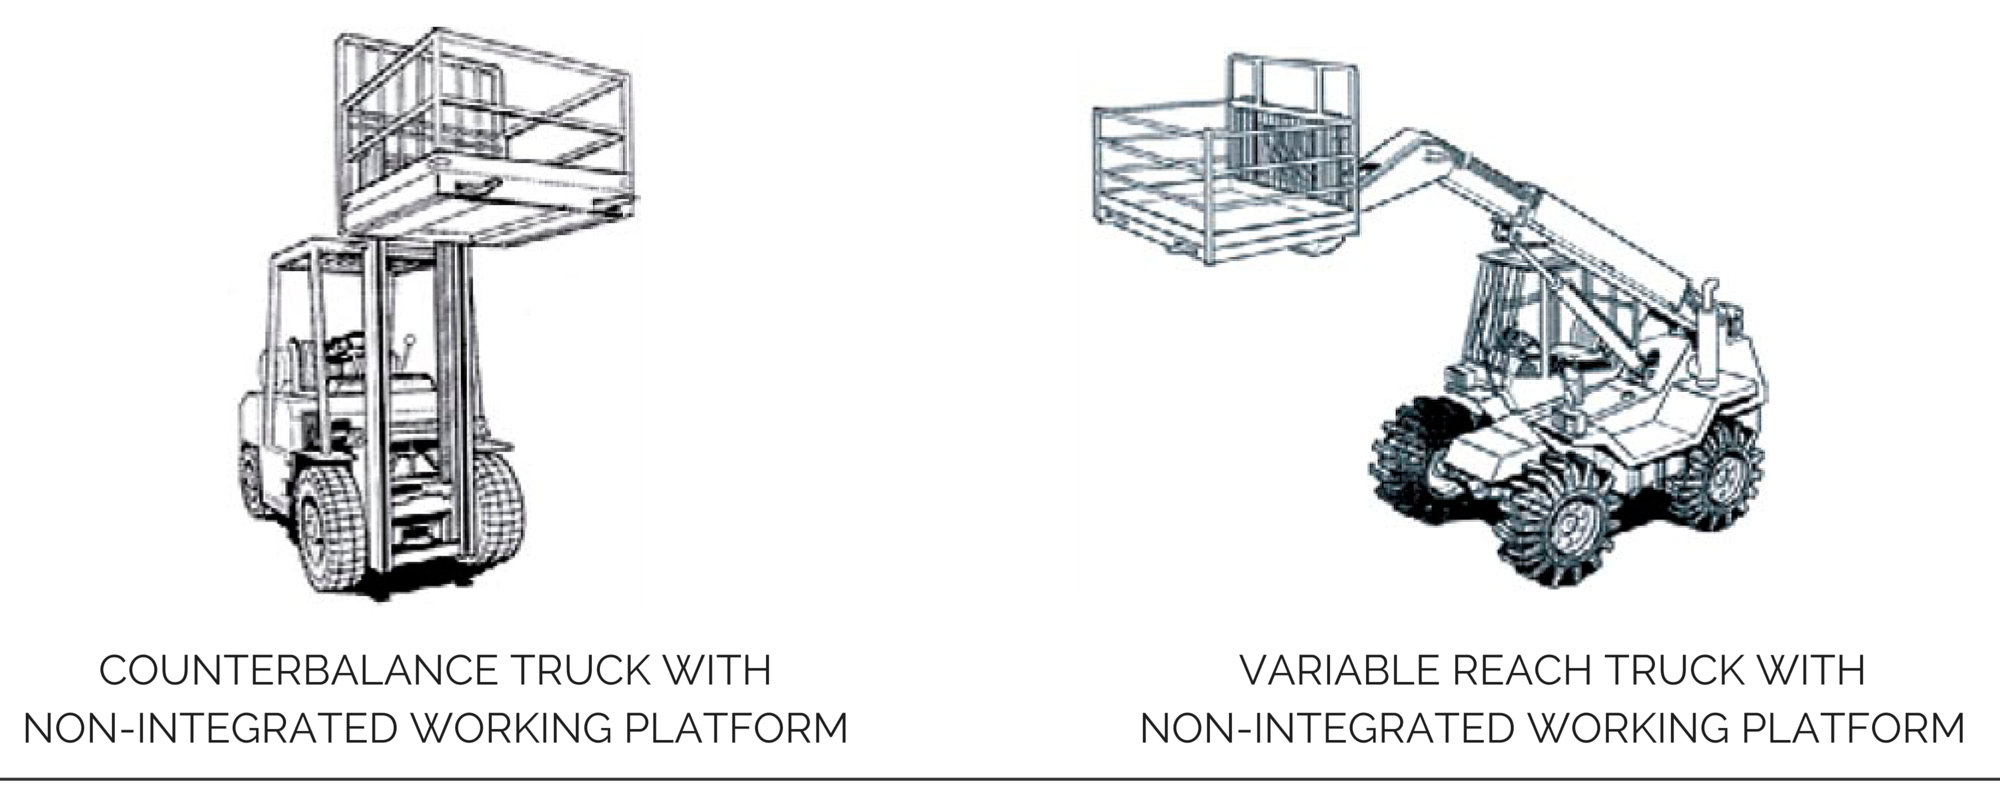 How to use forklift cages safely?